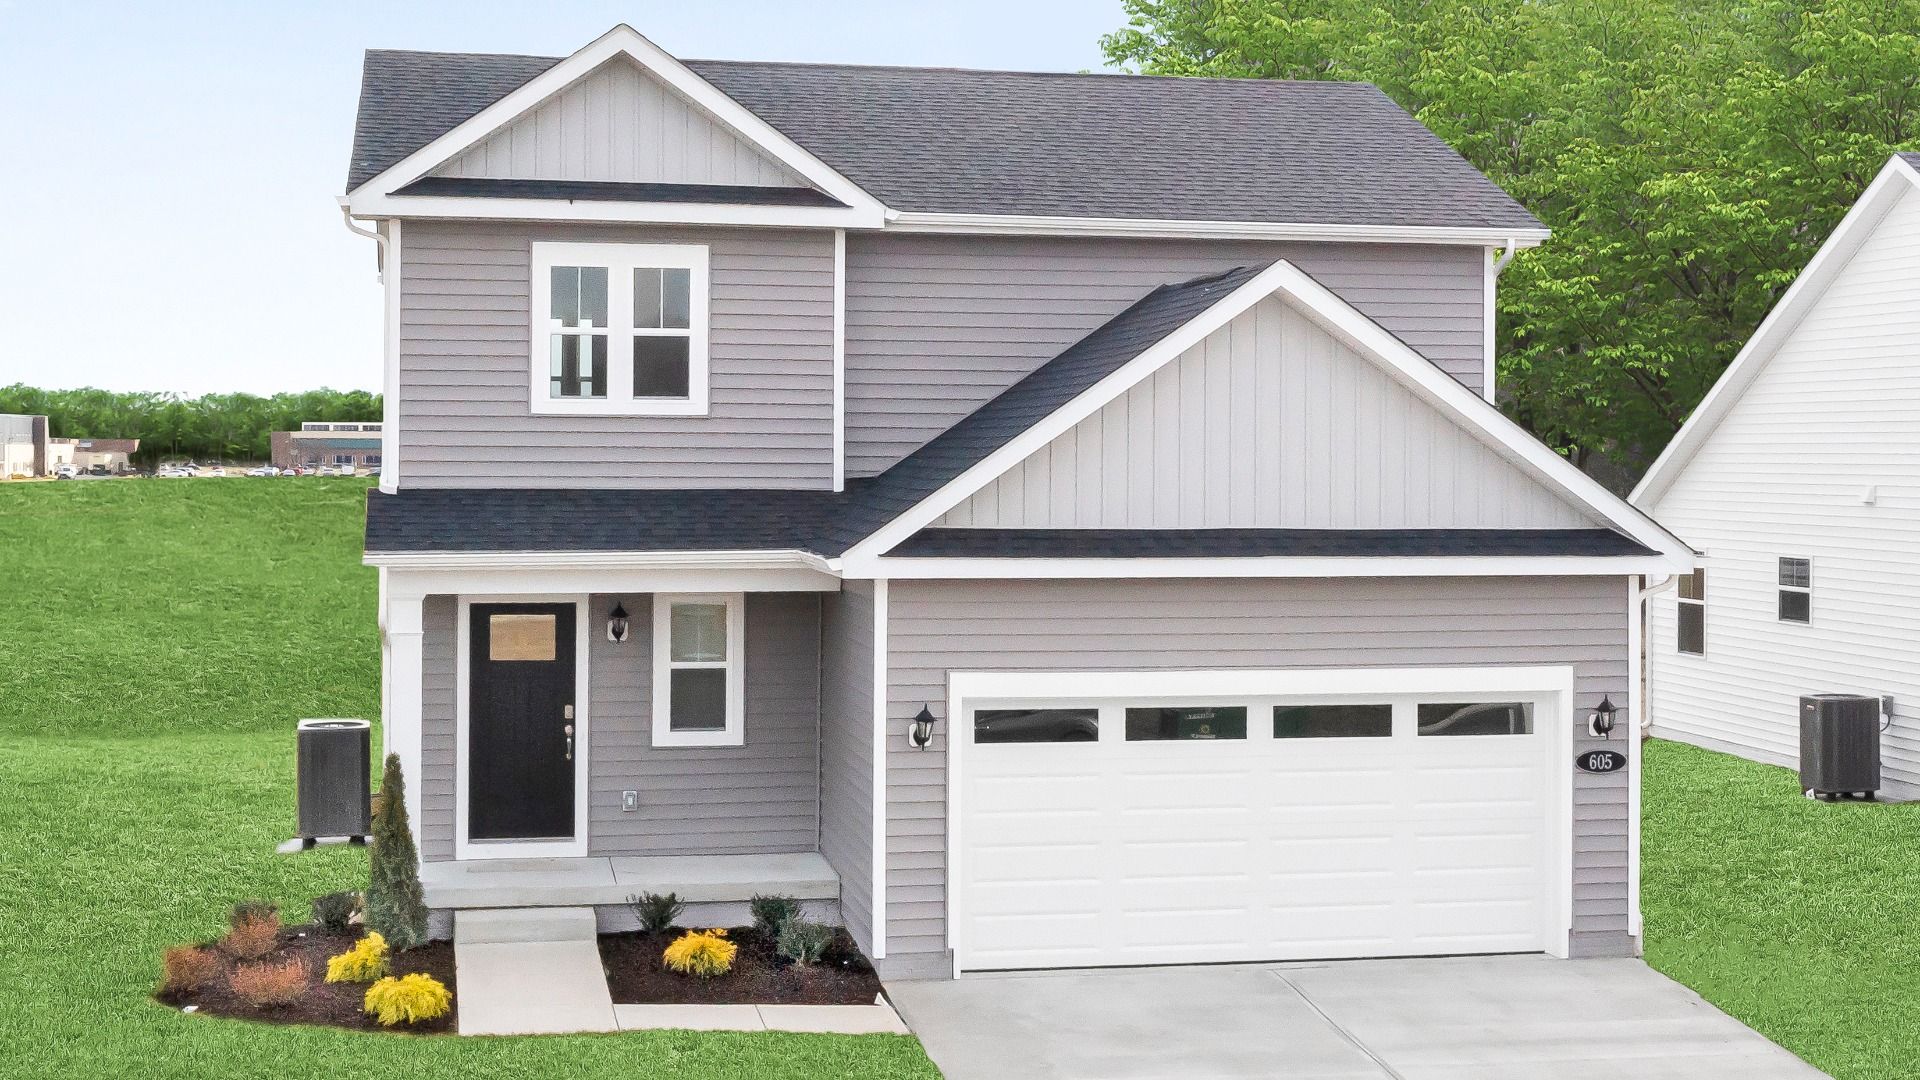 Glenshaw Plan at Village of College Park:2 Story home with covered front entry of a DRB Homes Glenshaw plan at The Village of College Park.